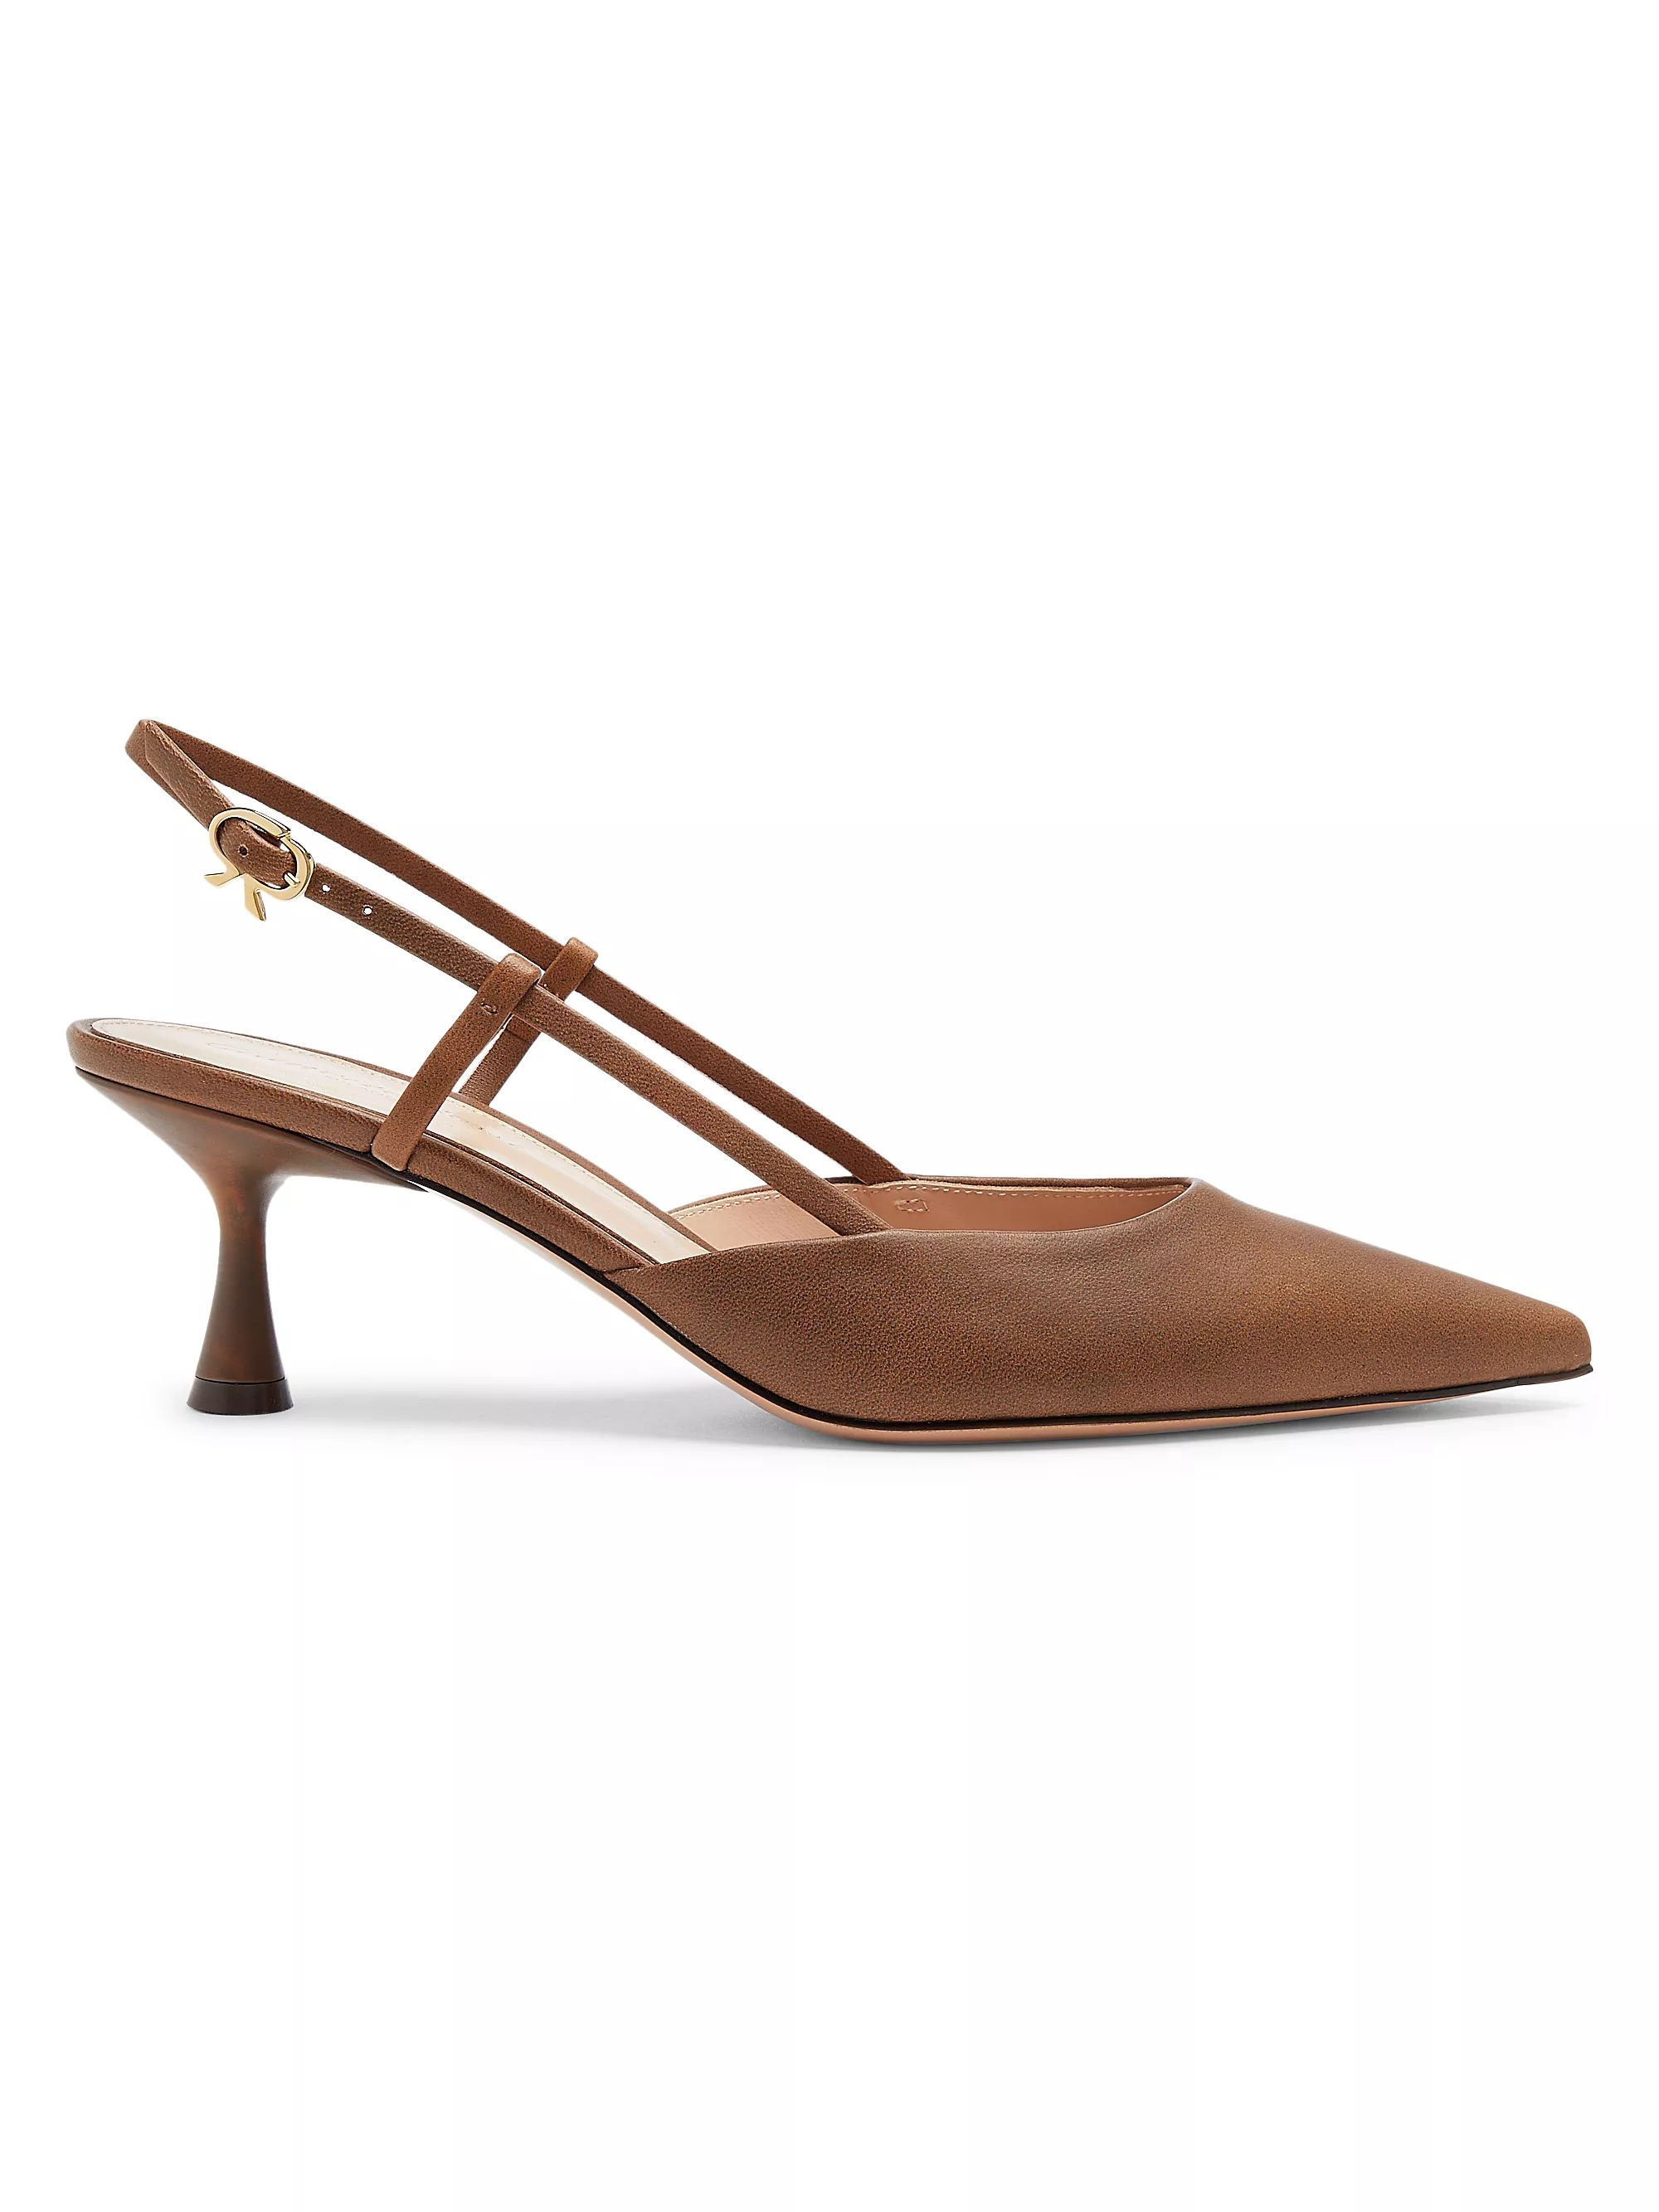 Shop Gianvito Rossi Ascent 55MM Leather Slingback Pumps | Saks Fifth Avenue | Saks Fifth Avenue